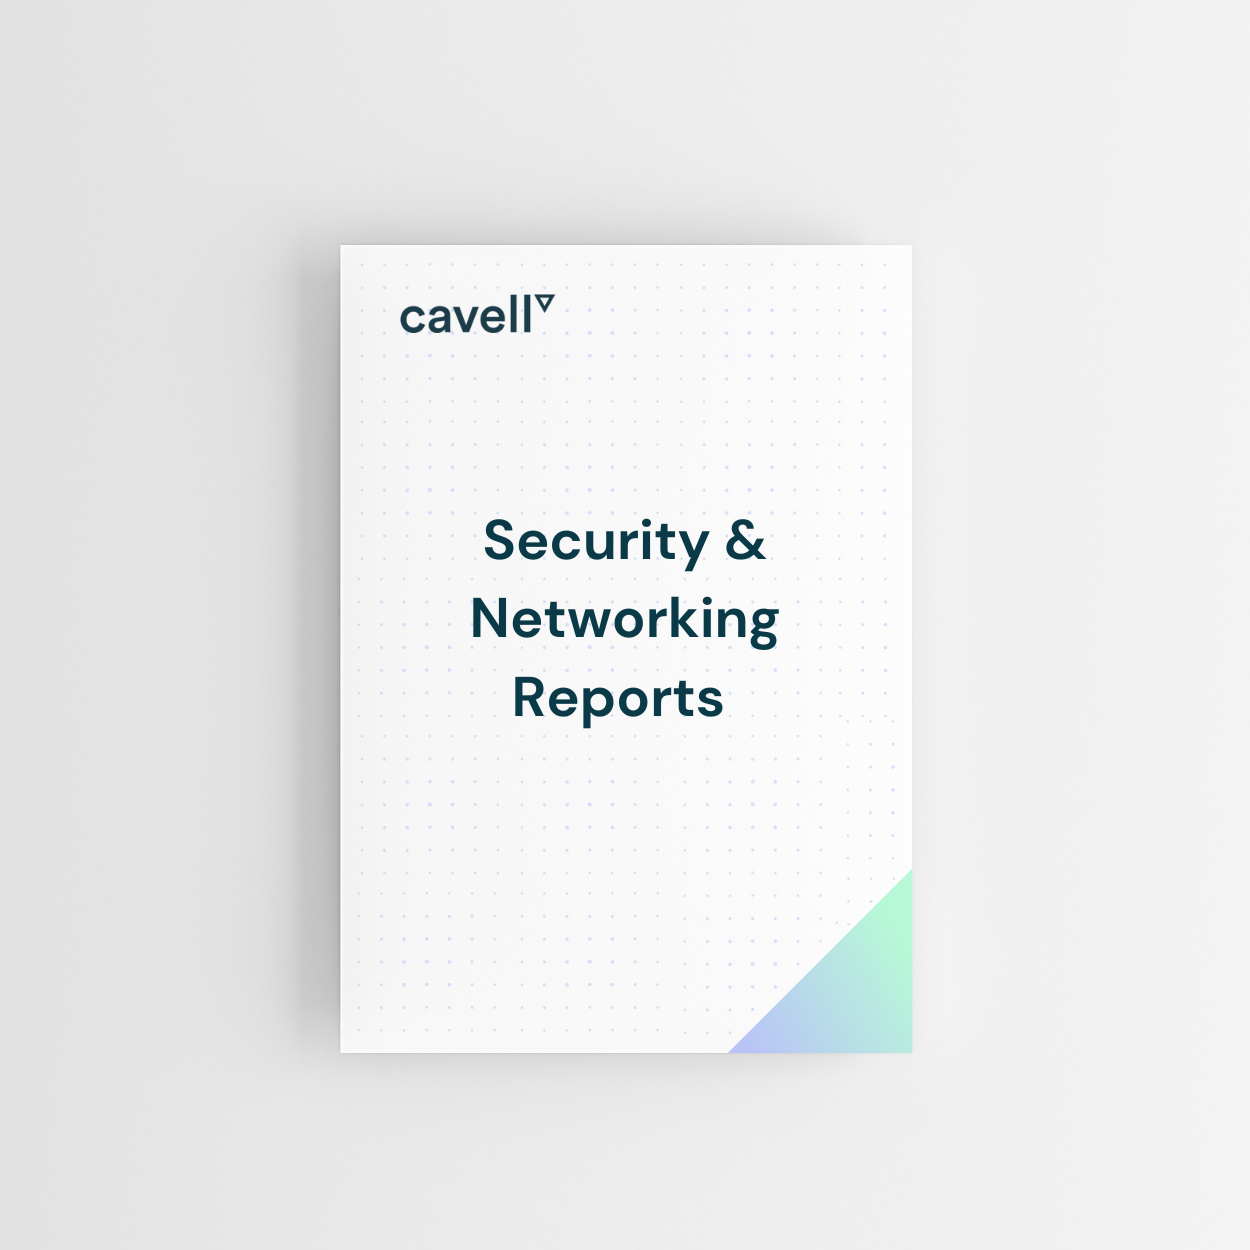 Security & Networking Reports